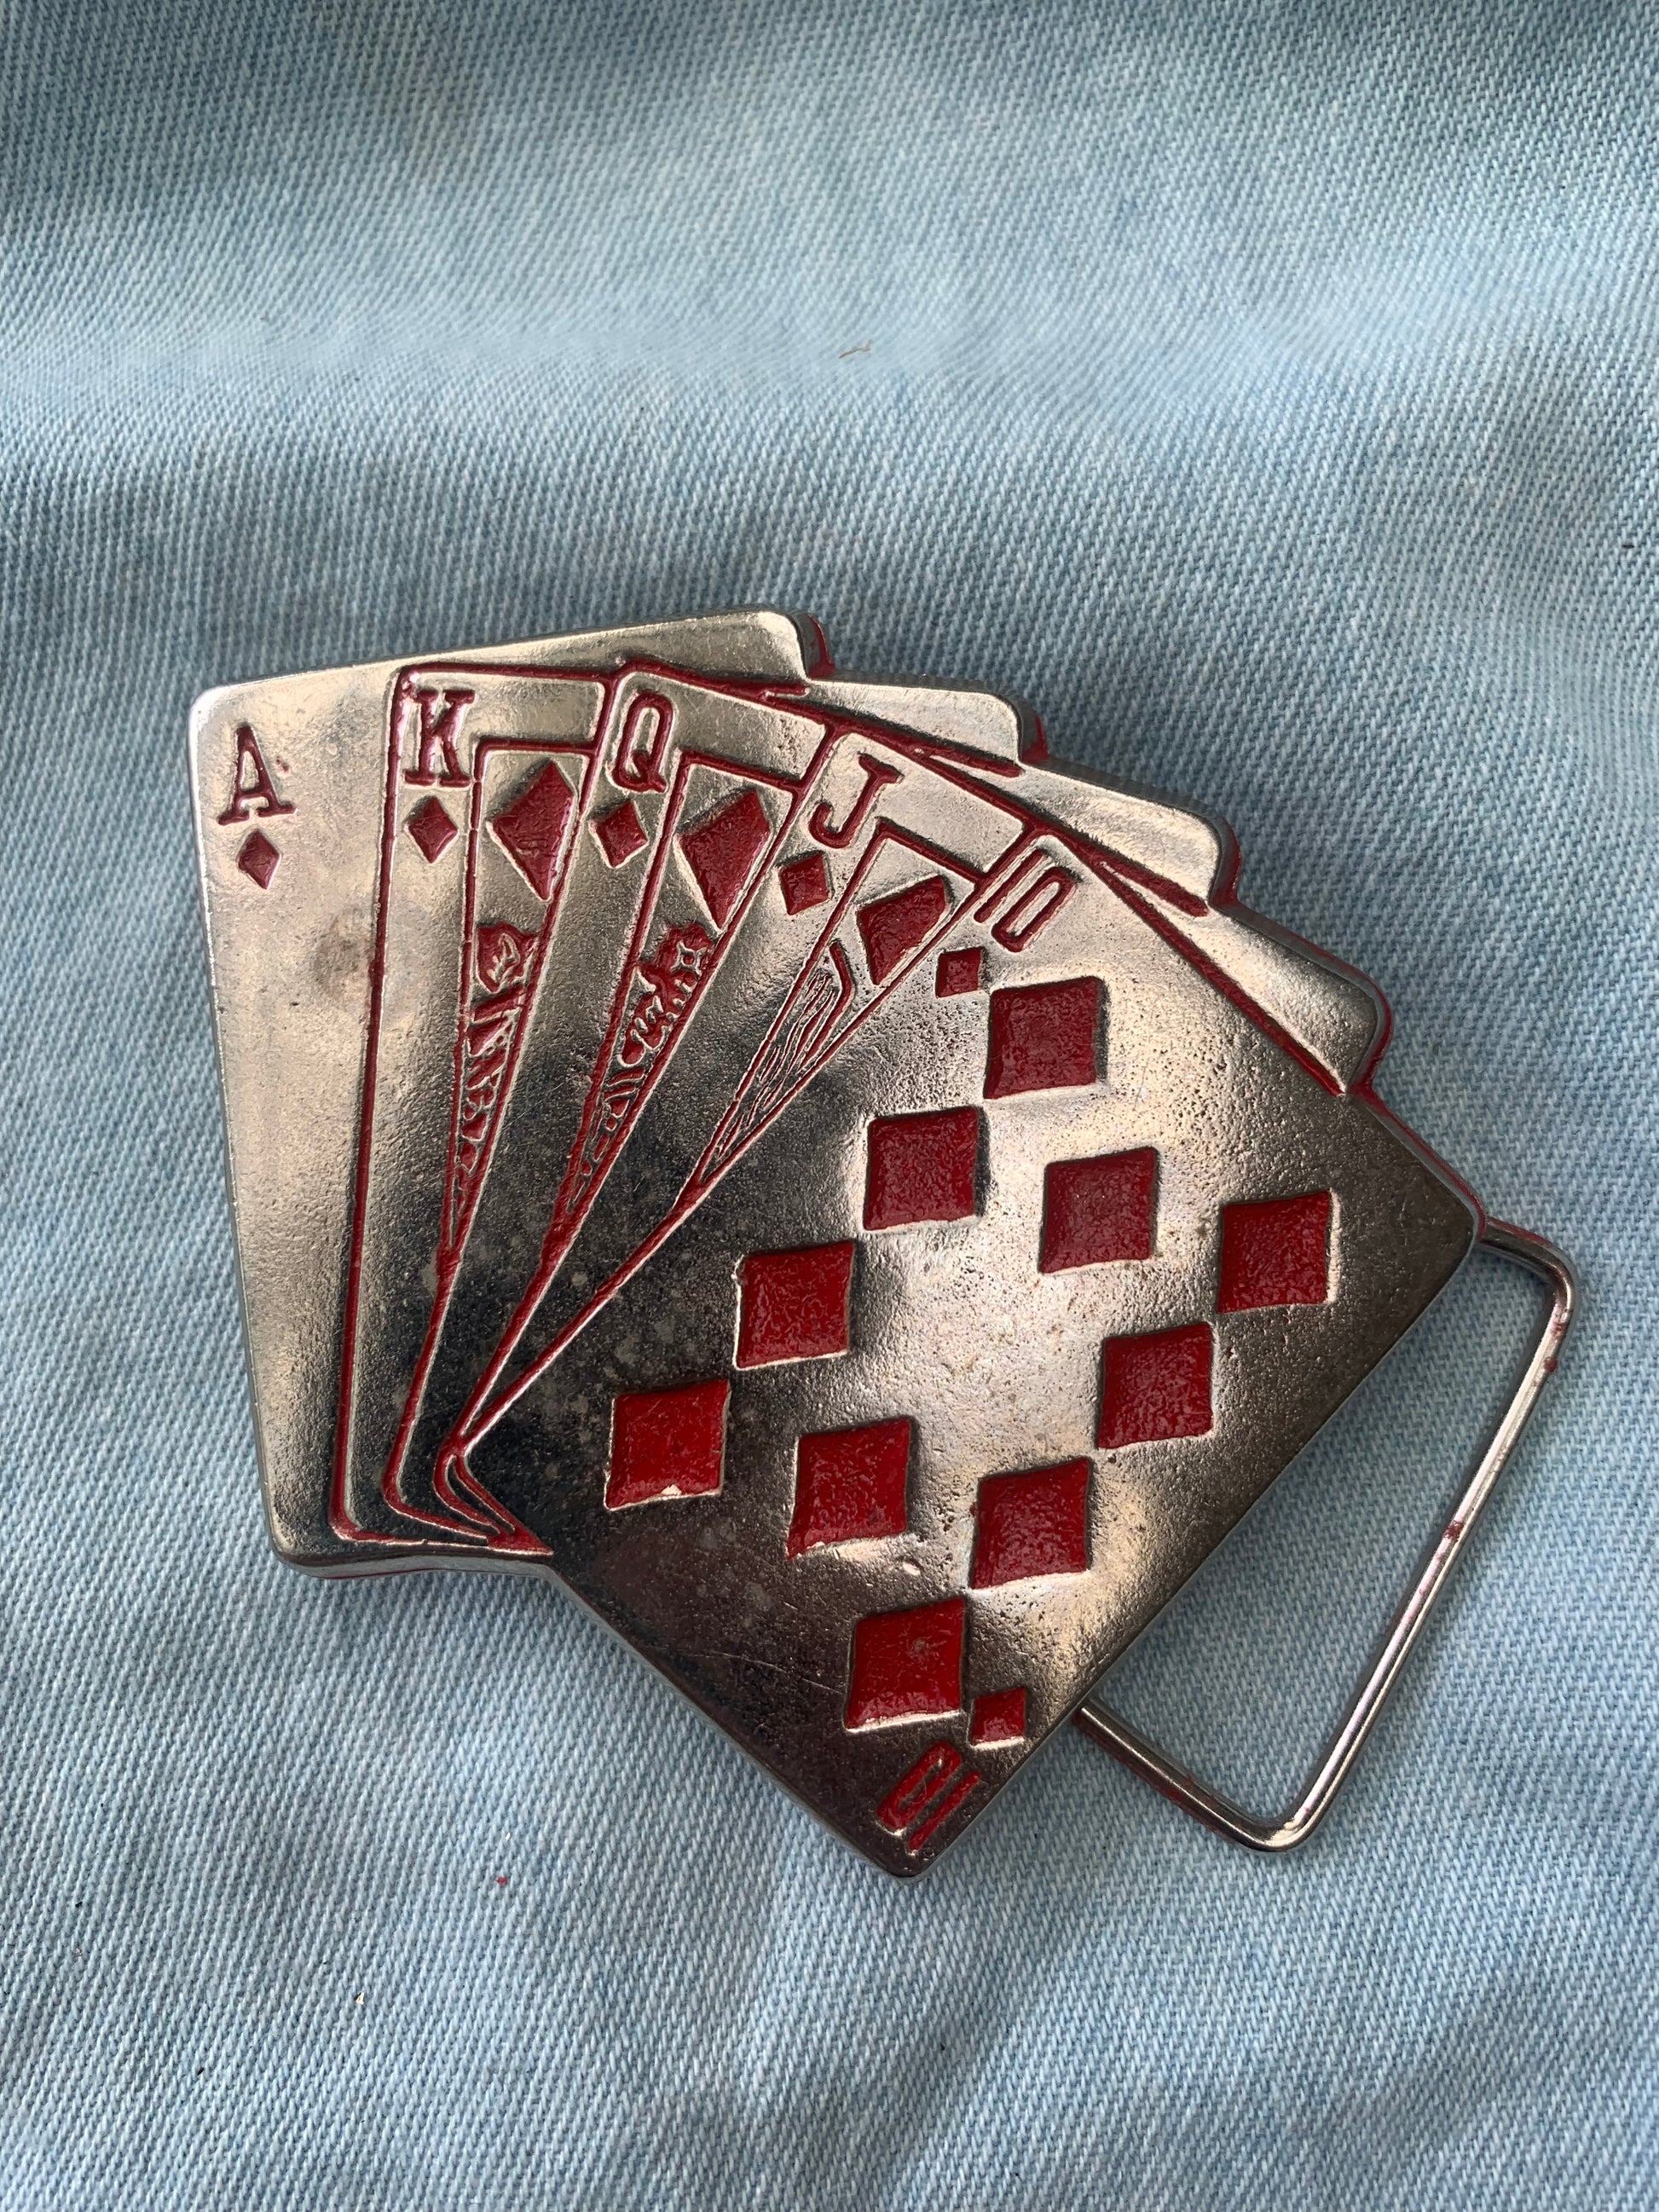 Belt Buckle Playing Cards Front